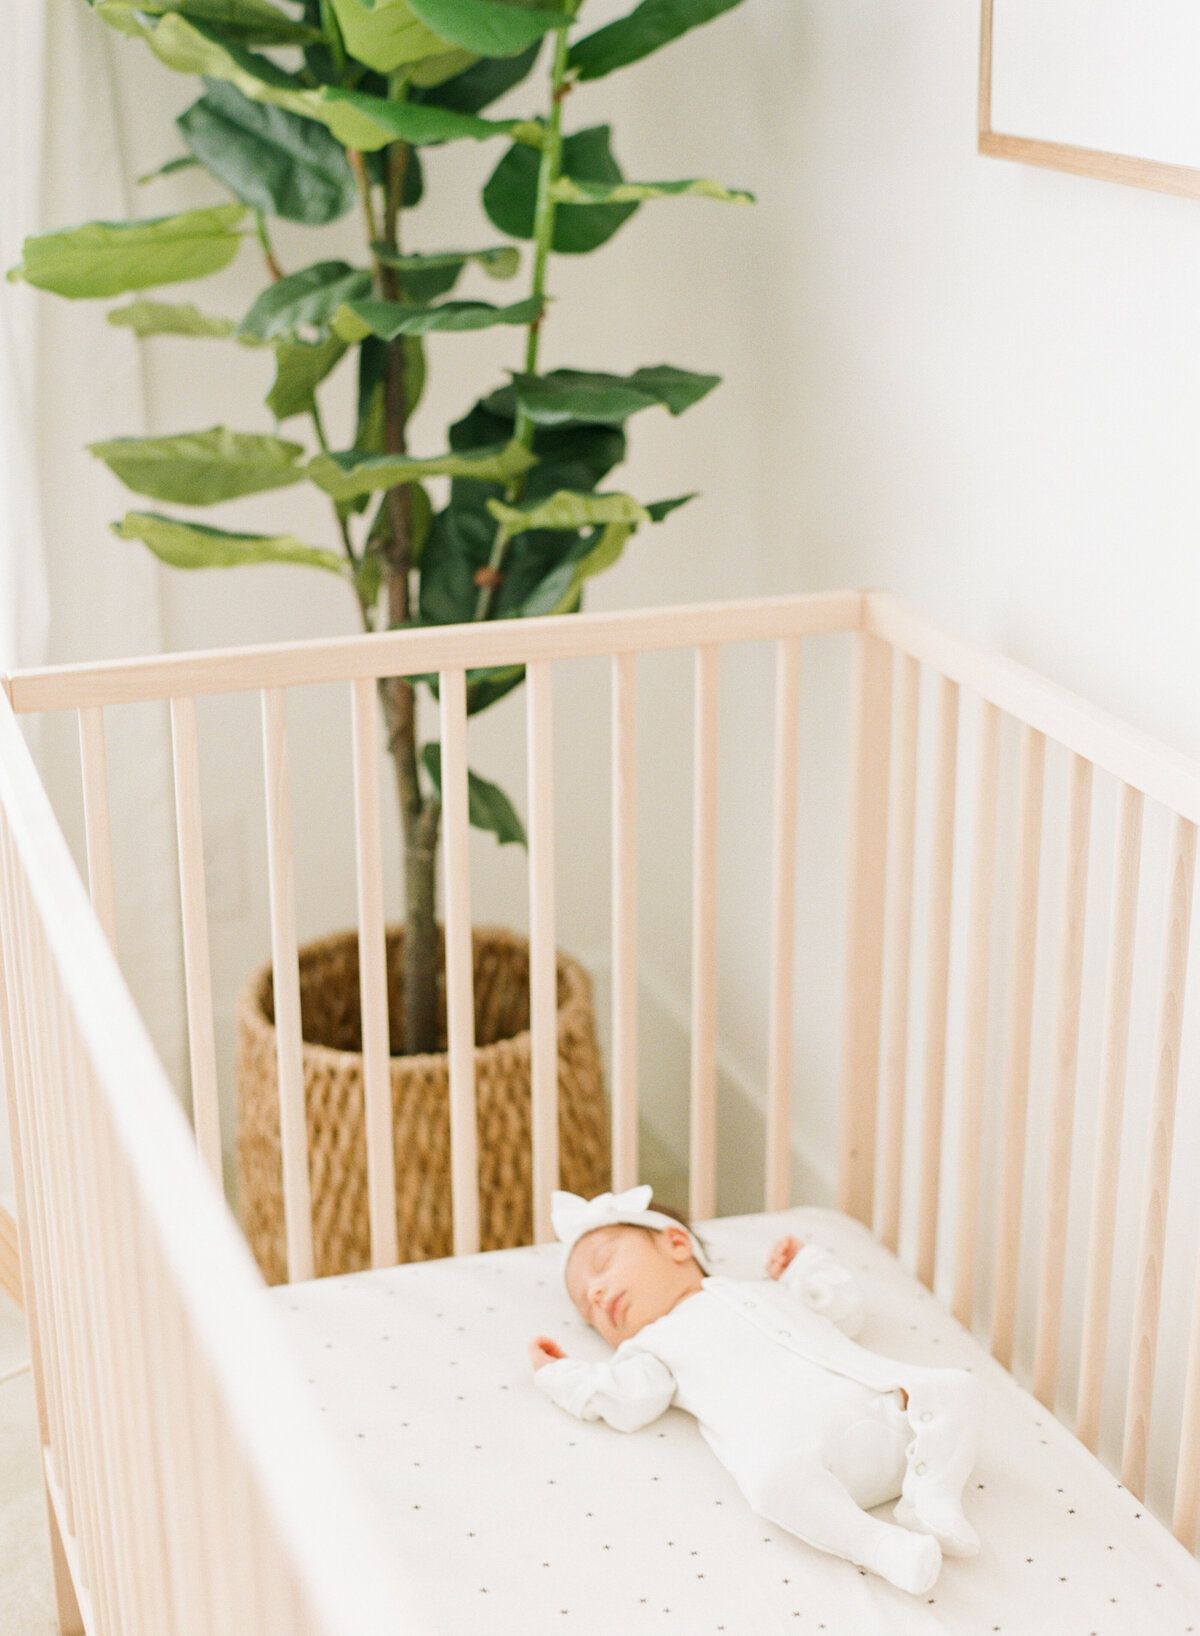 Newborn baby girl in a white bow lays in her ikea crib while sleeping during a Raleigh NC newborn portrait session. Photographed by newborn photographer Raleigh A.J. Dunlap Photography.